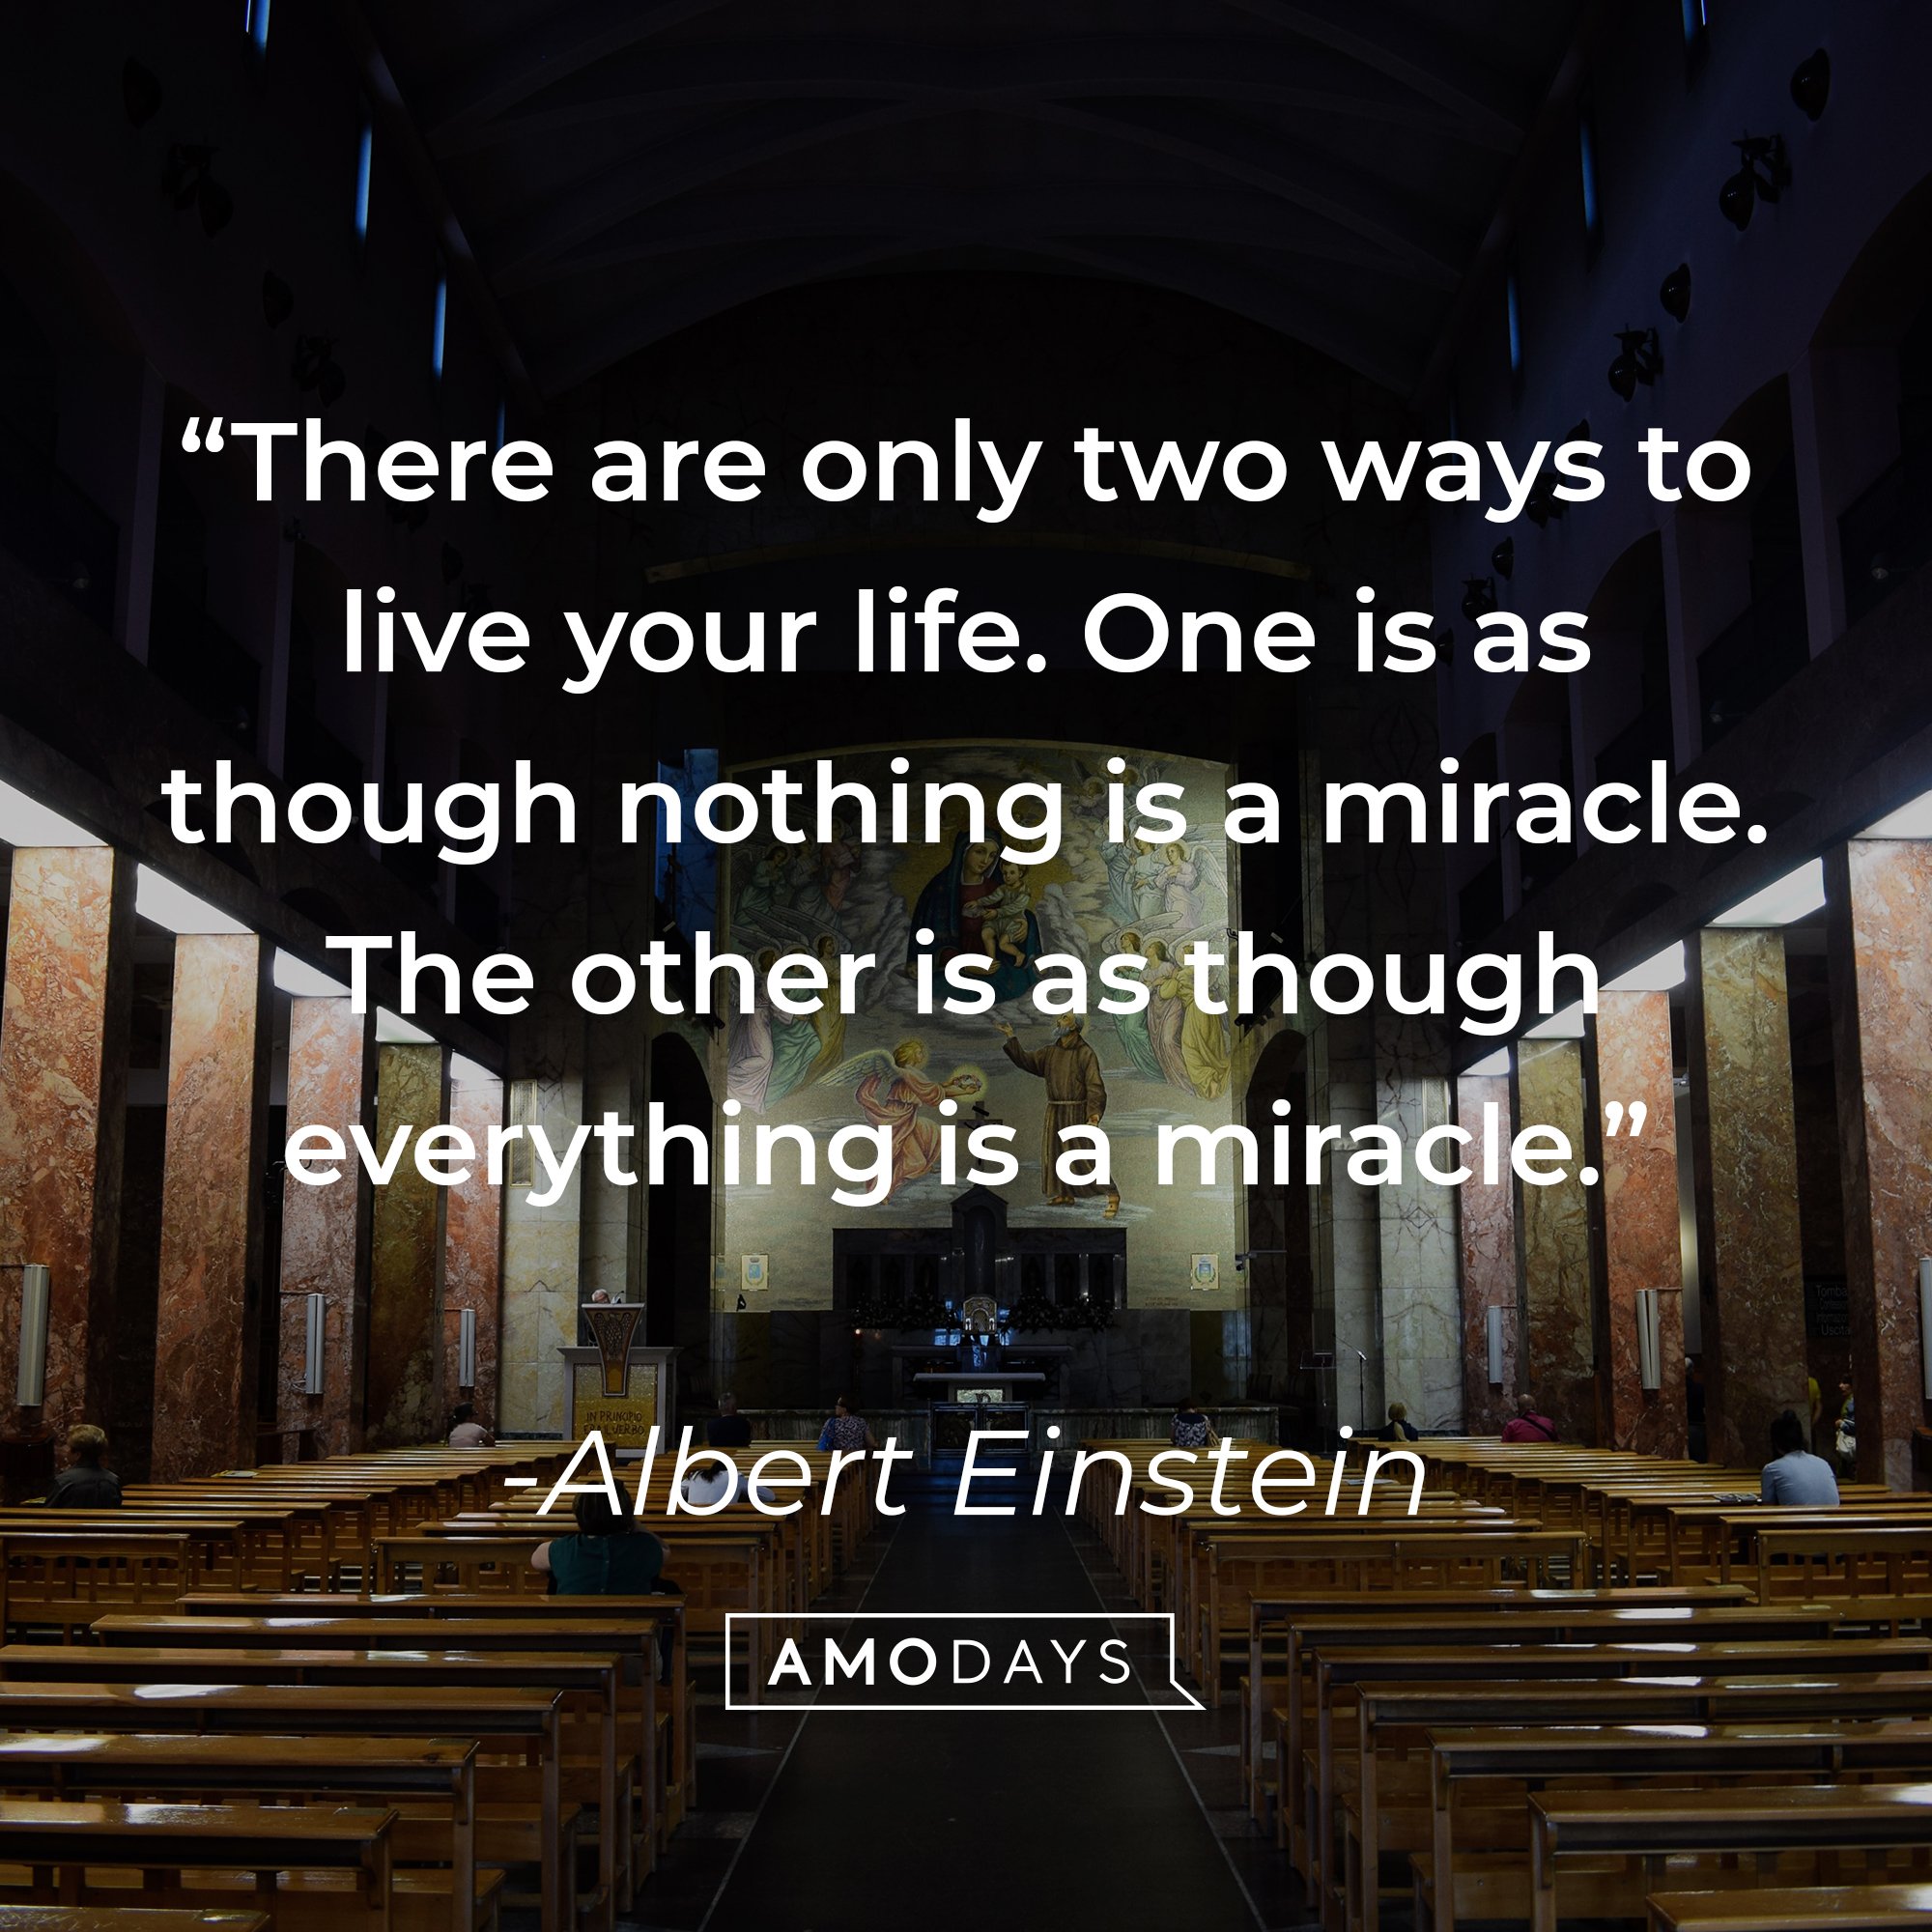 Albert Einstein’s quote: “There are only two ways to live your life. One is as though nothing is a miracle. The other is as though everything is a miracle.” | Image: Amodays